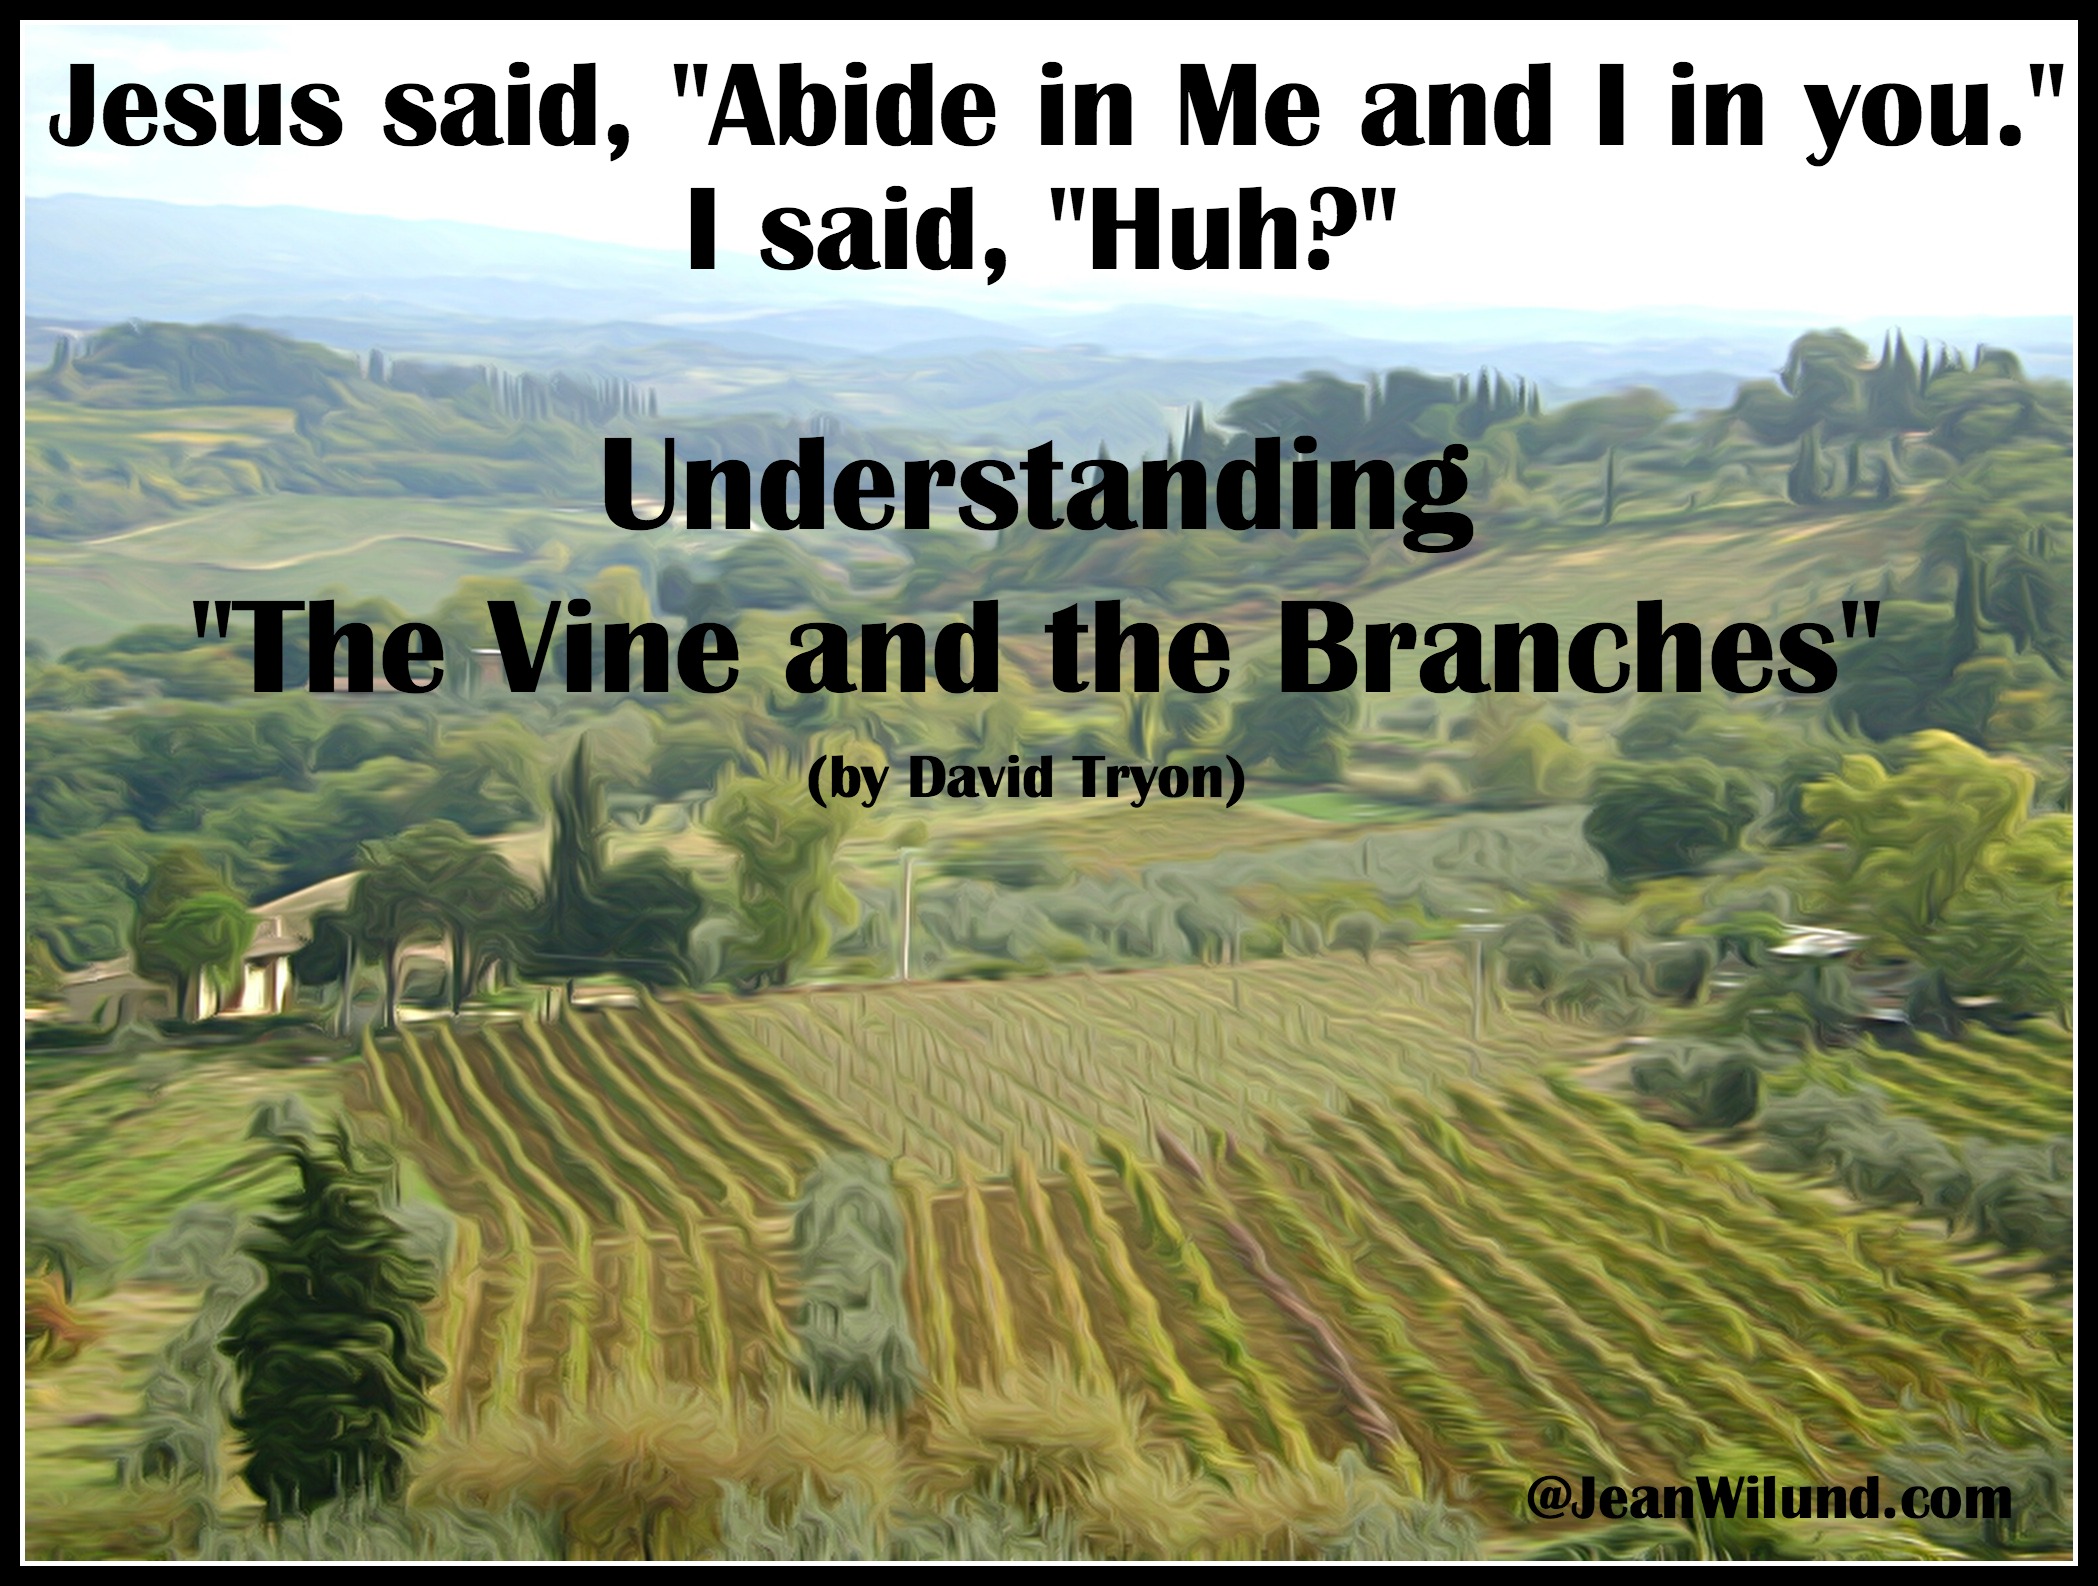 How to Understand John 15: The Vine and the Branches